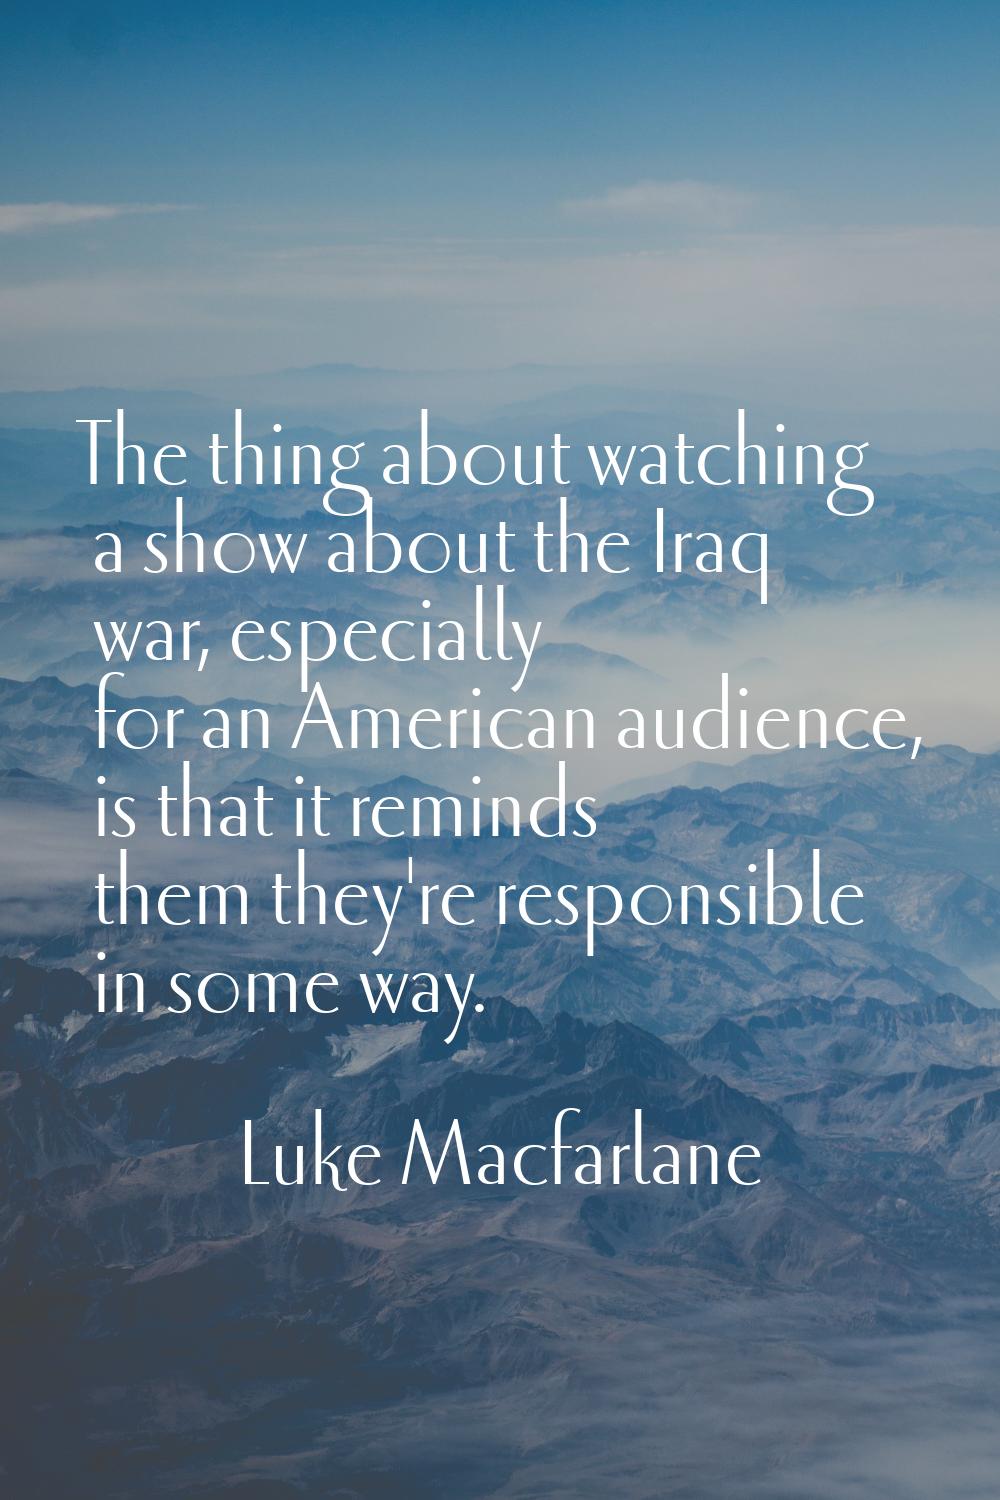 The thing about watching a show about the Iraq war, especially for an American audience, is that it